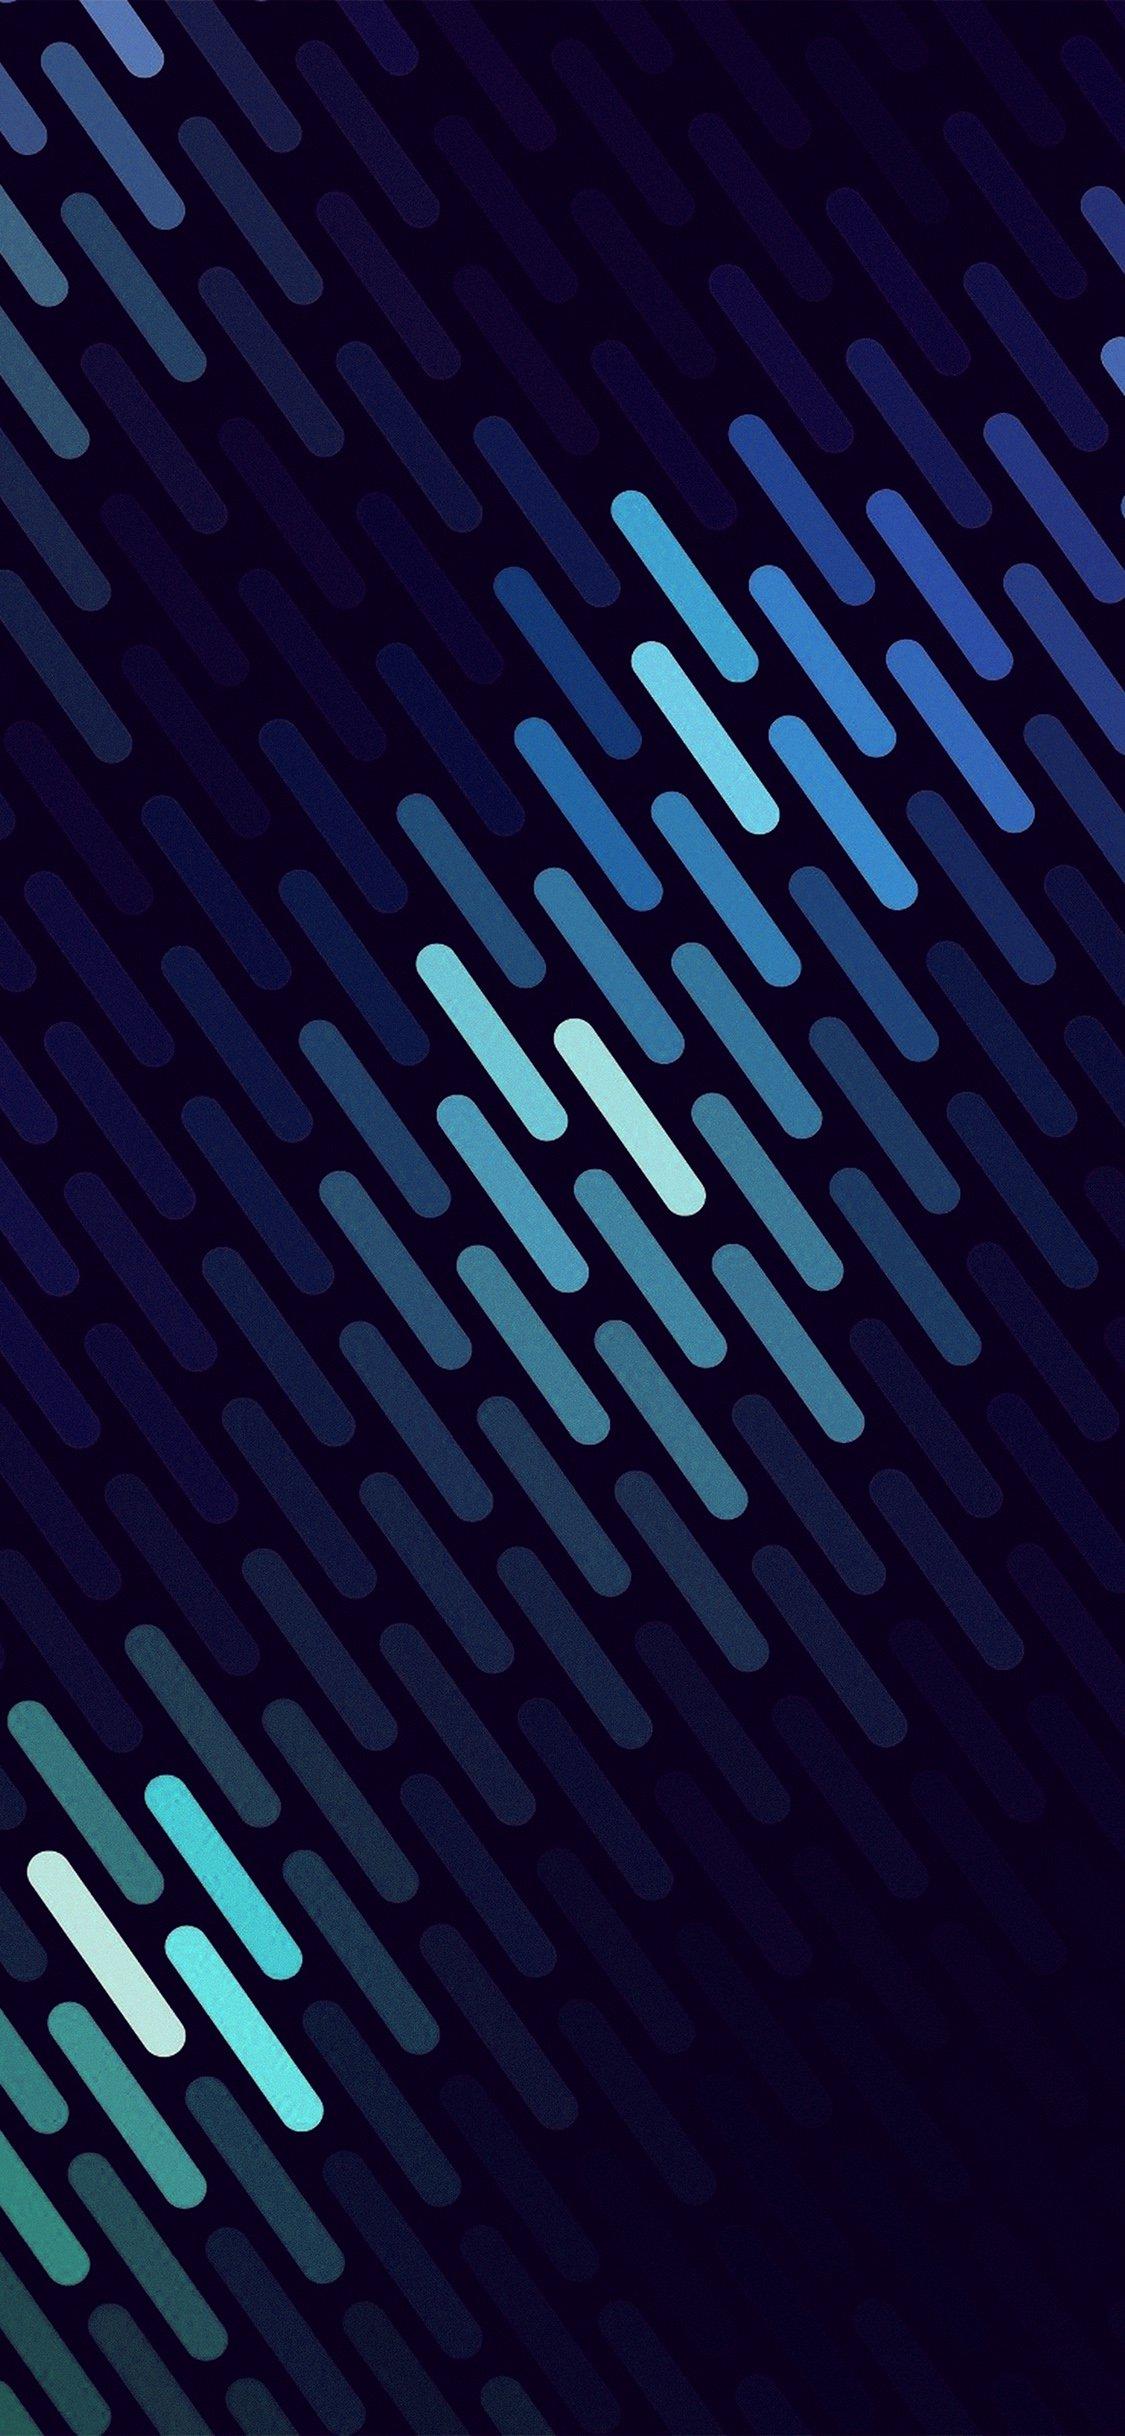 iPhone wallpaper. abstract blue